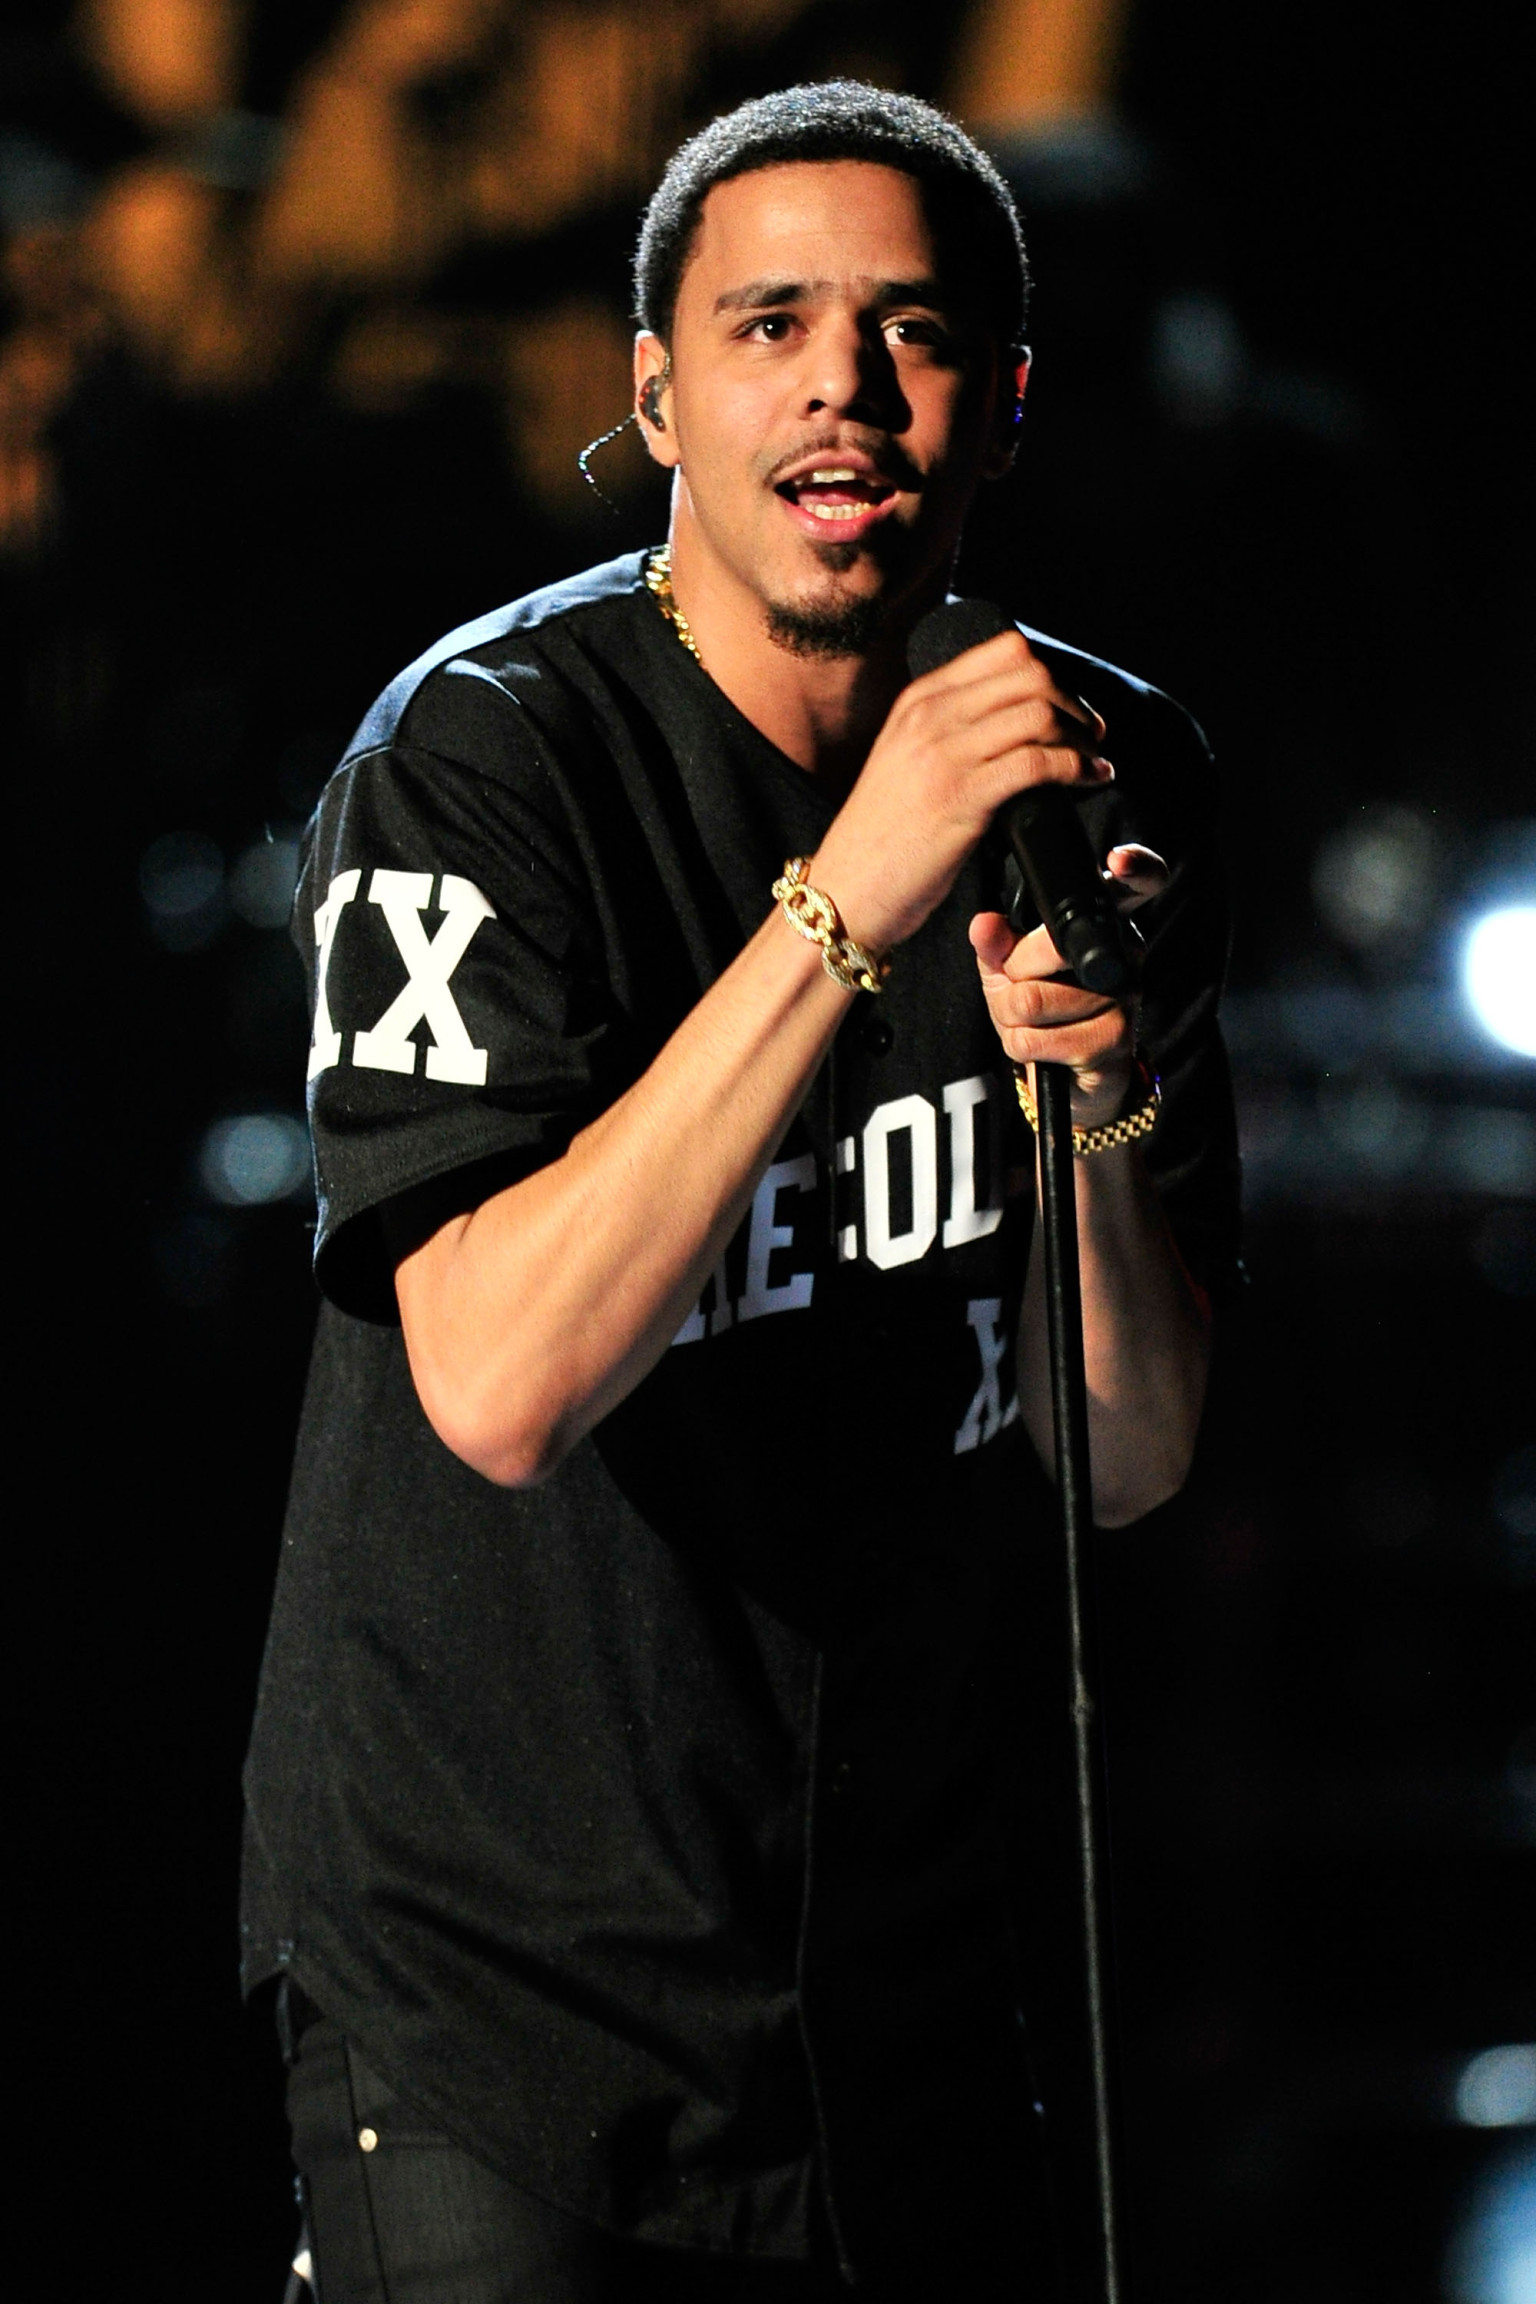 J Cole Wallpapers High Quality Download Free HD Wallpapers Download Free Images Wallpaper [wallpaper981.blogspot.com]